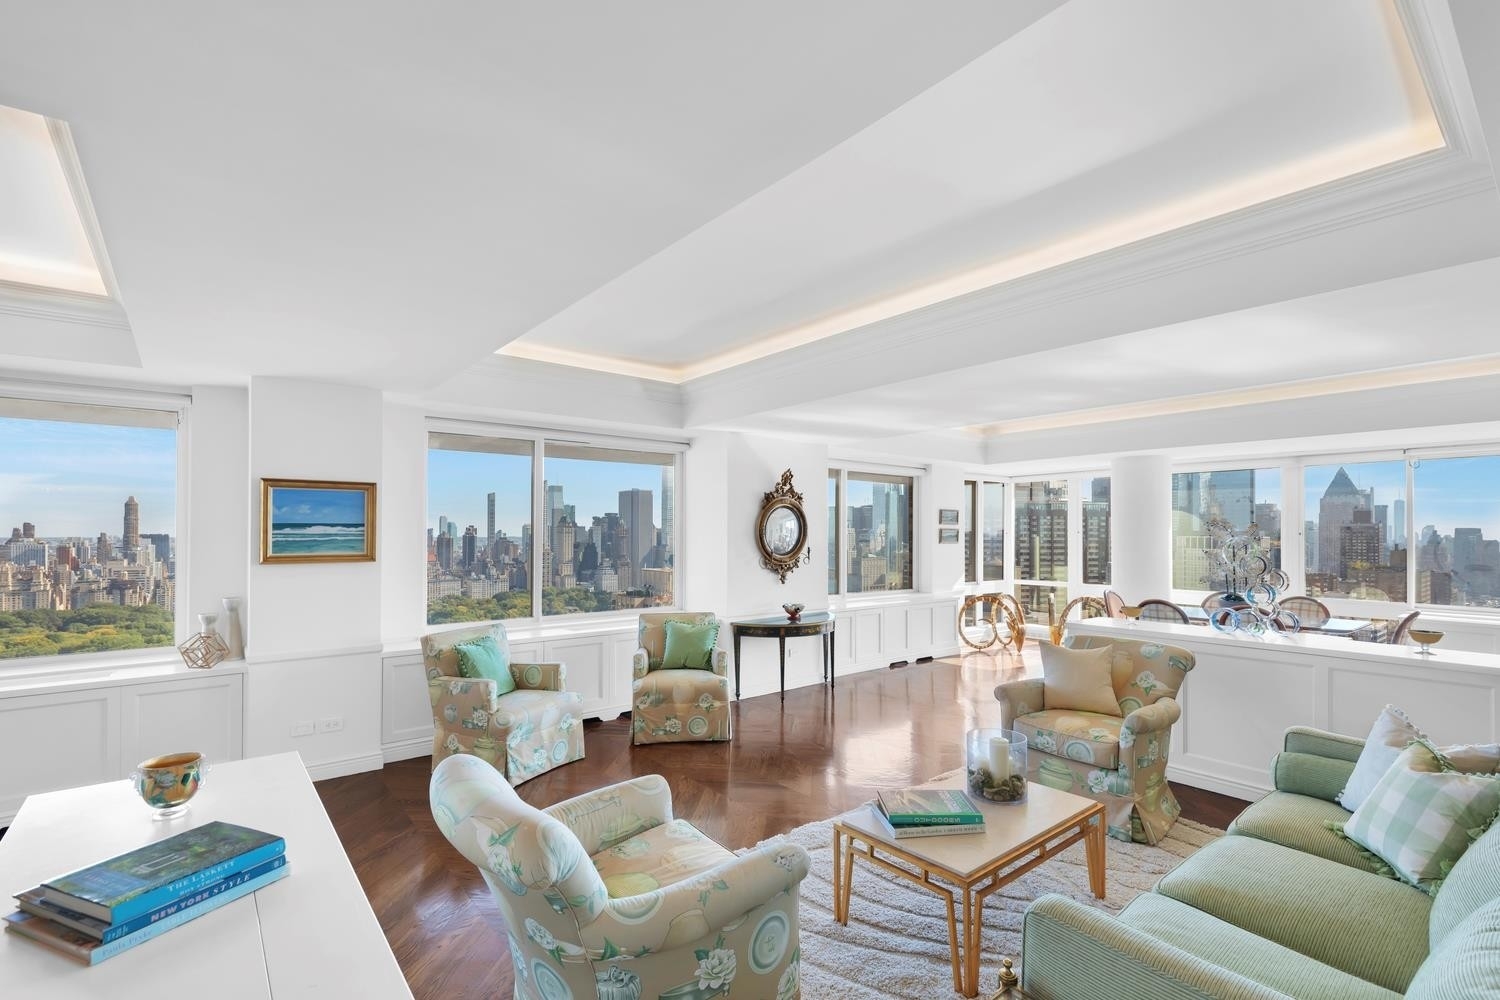 Condominium for Sale at The Millennium Tower, 111 W 67TH ST, 43A Lincoln Square, New York, New York 10023